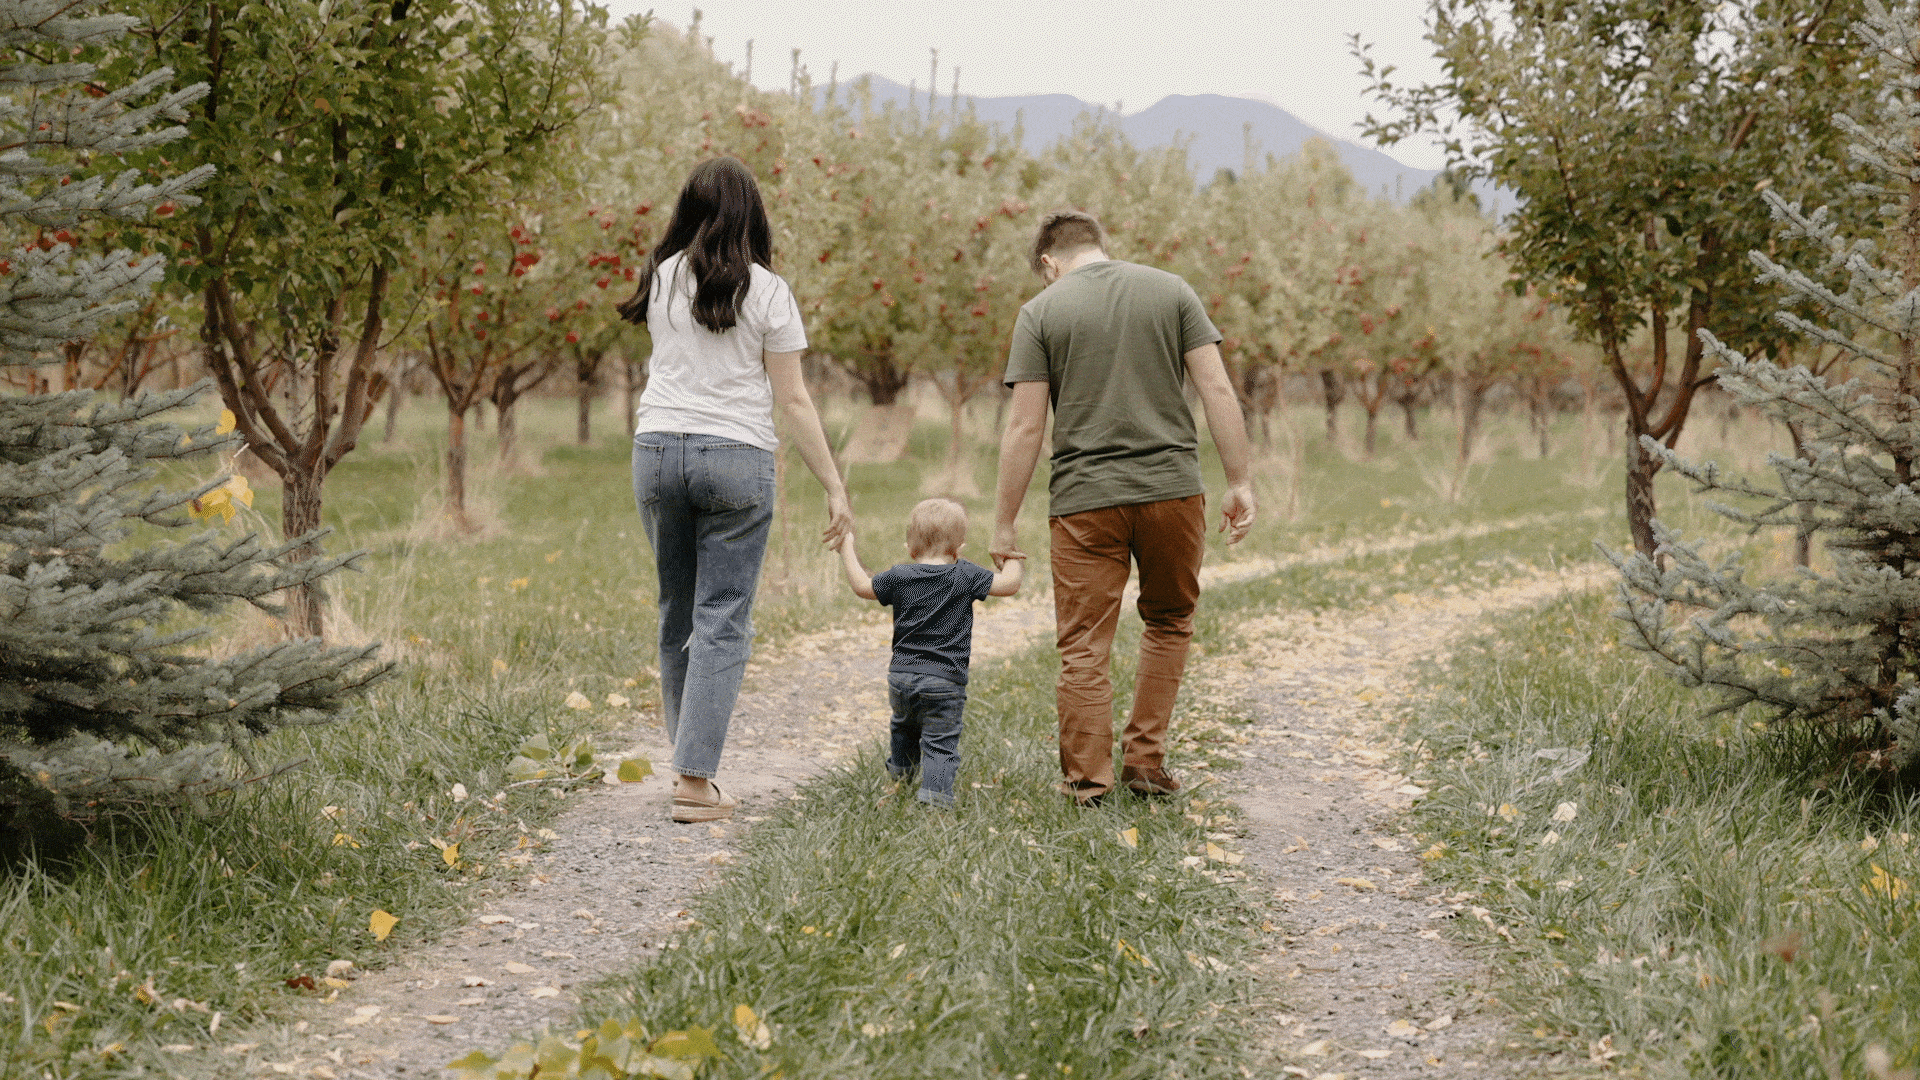 A Family Walking Through An Orchard In The Fall